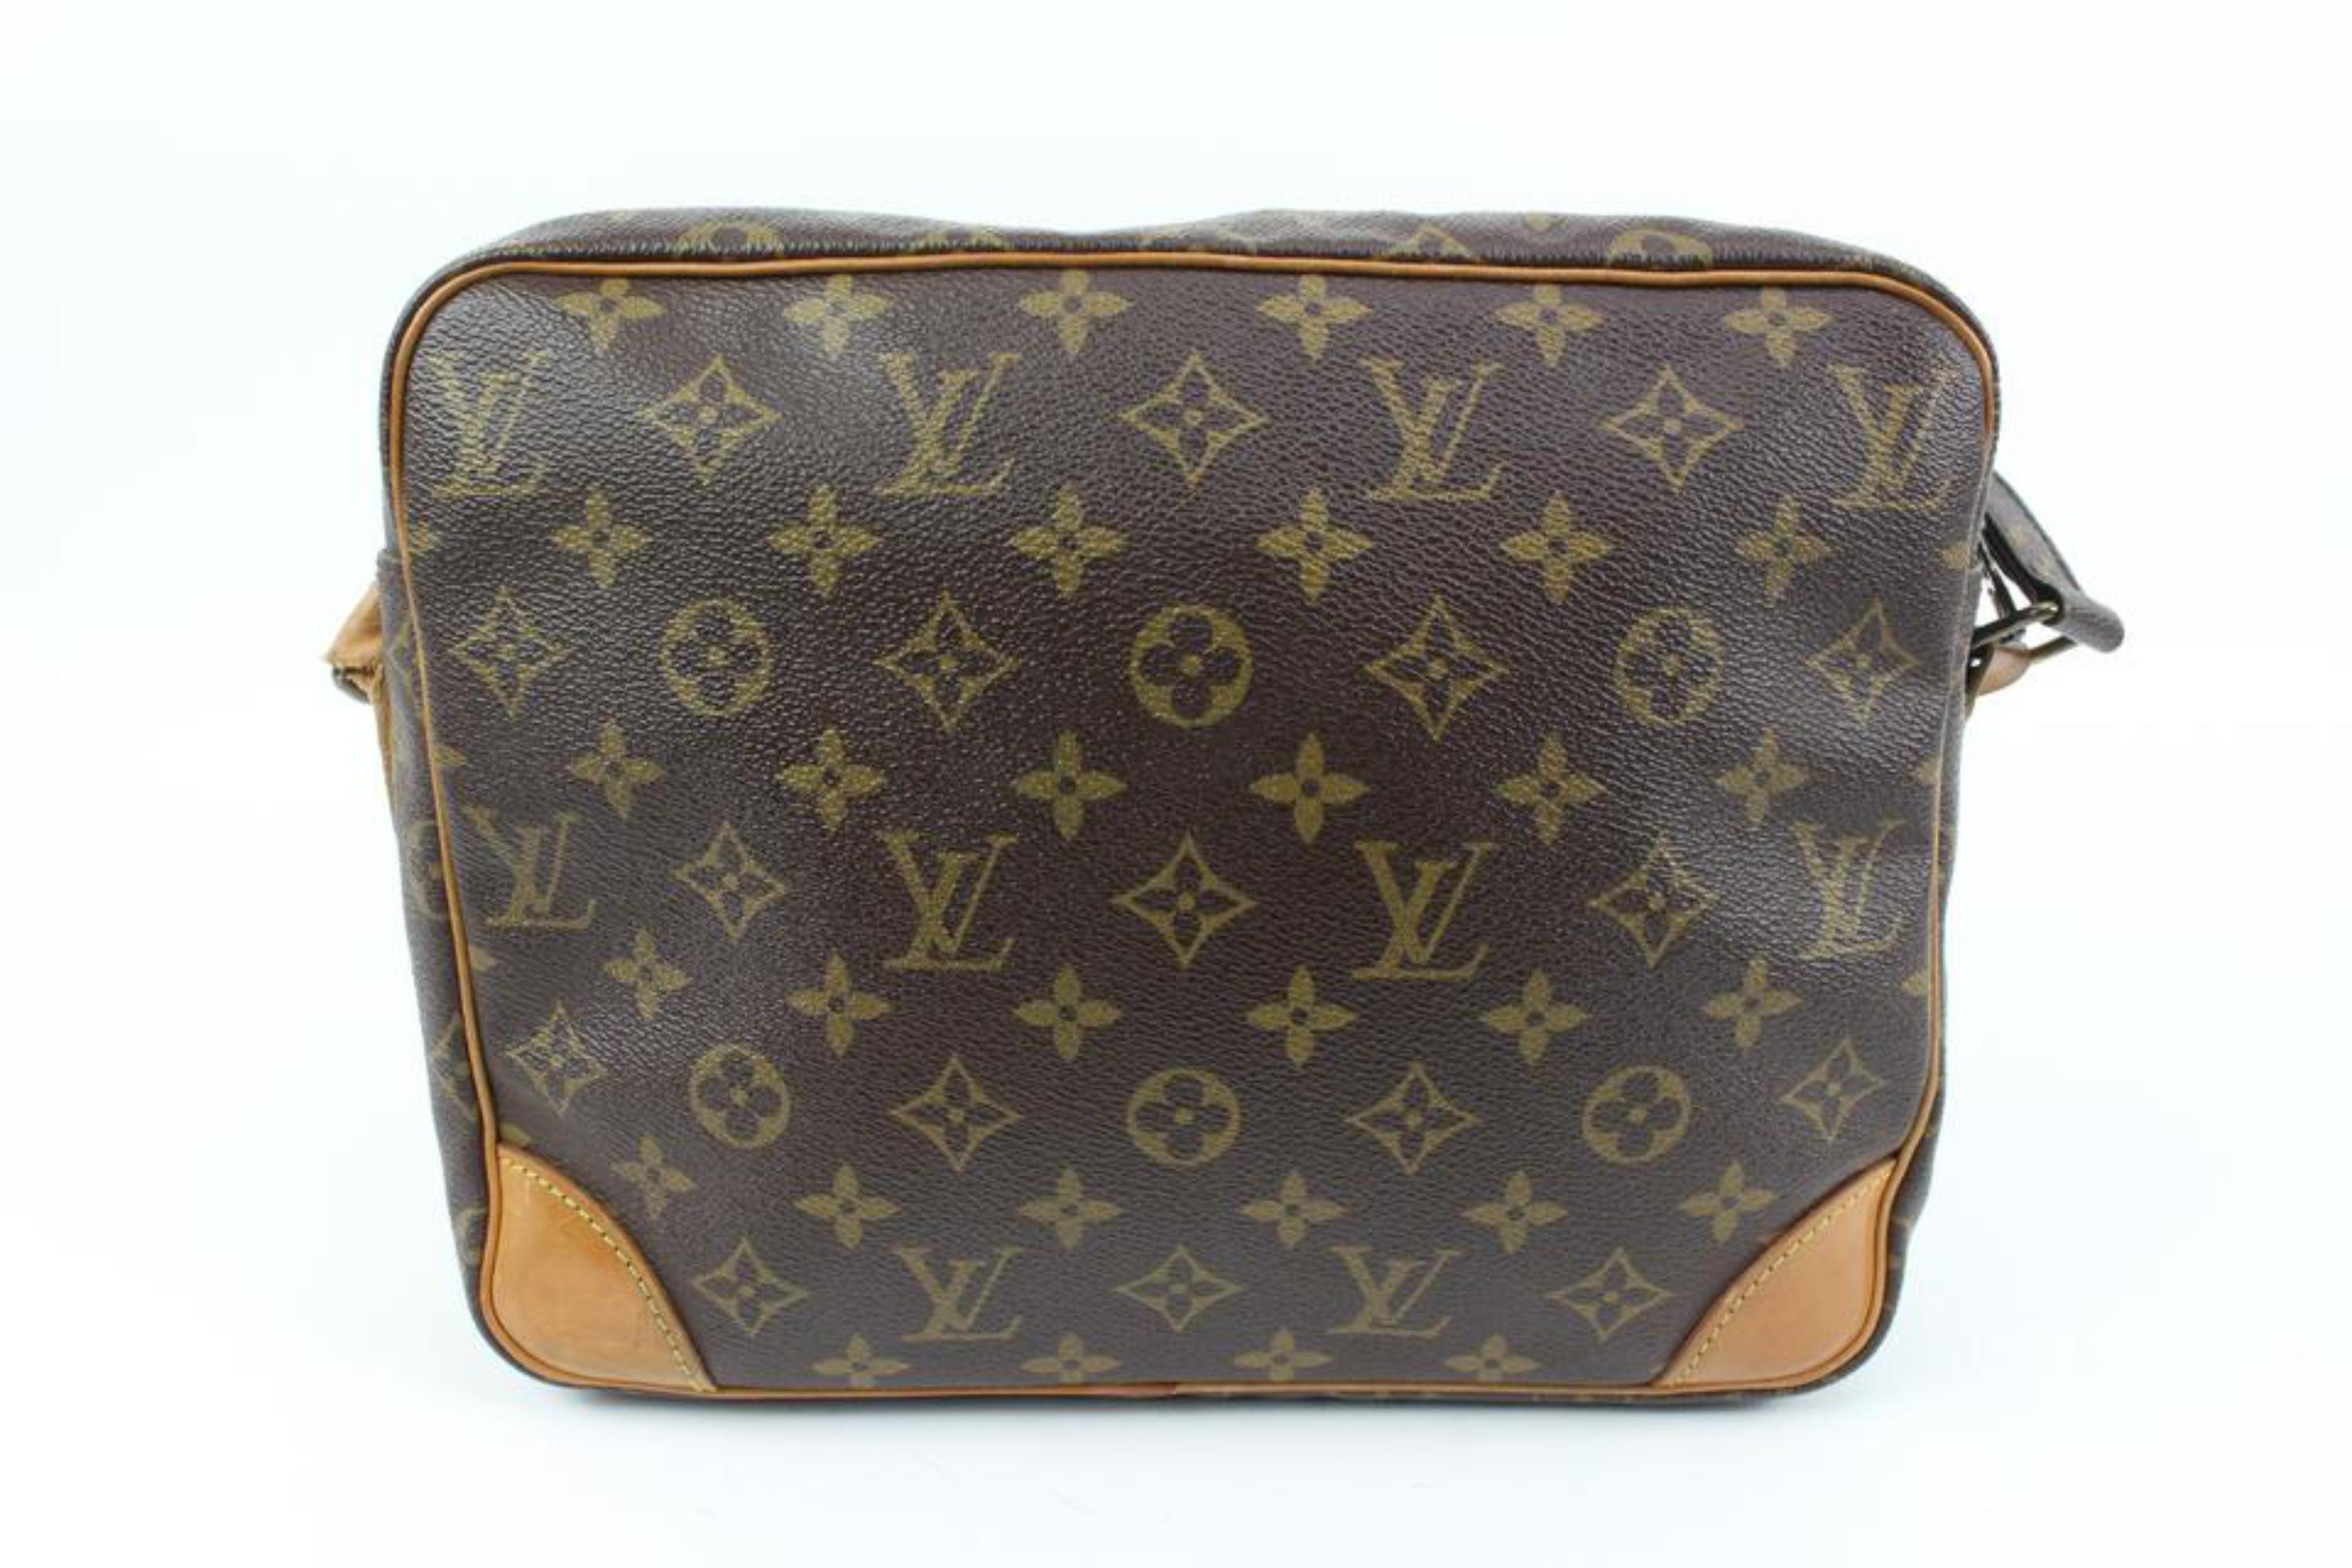 Louis Vuitton Rare Vintage Monogram Potomac Crossbody Messenger 24lk324s In Good Condition For Sale In Dix hills, NY